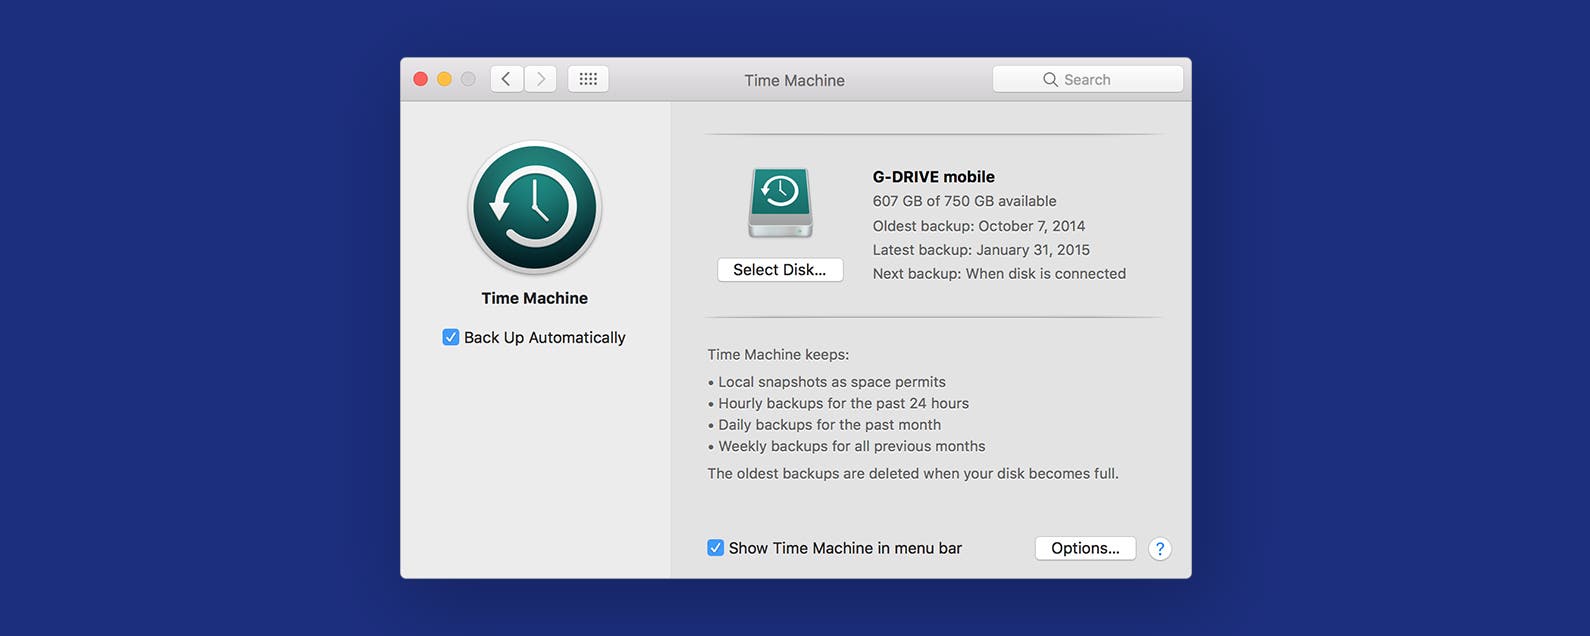 download the new version for mac Total Uninstall Professional 7.4.0